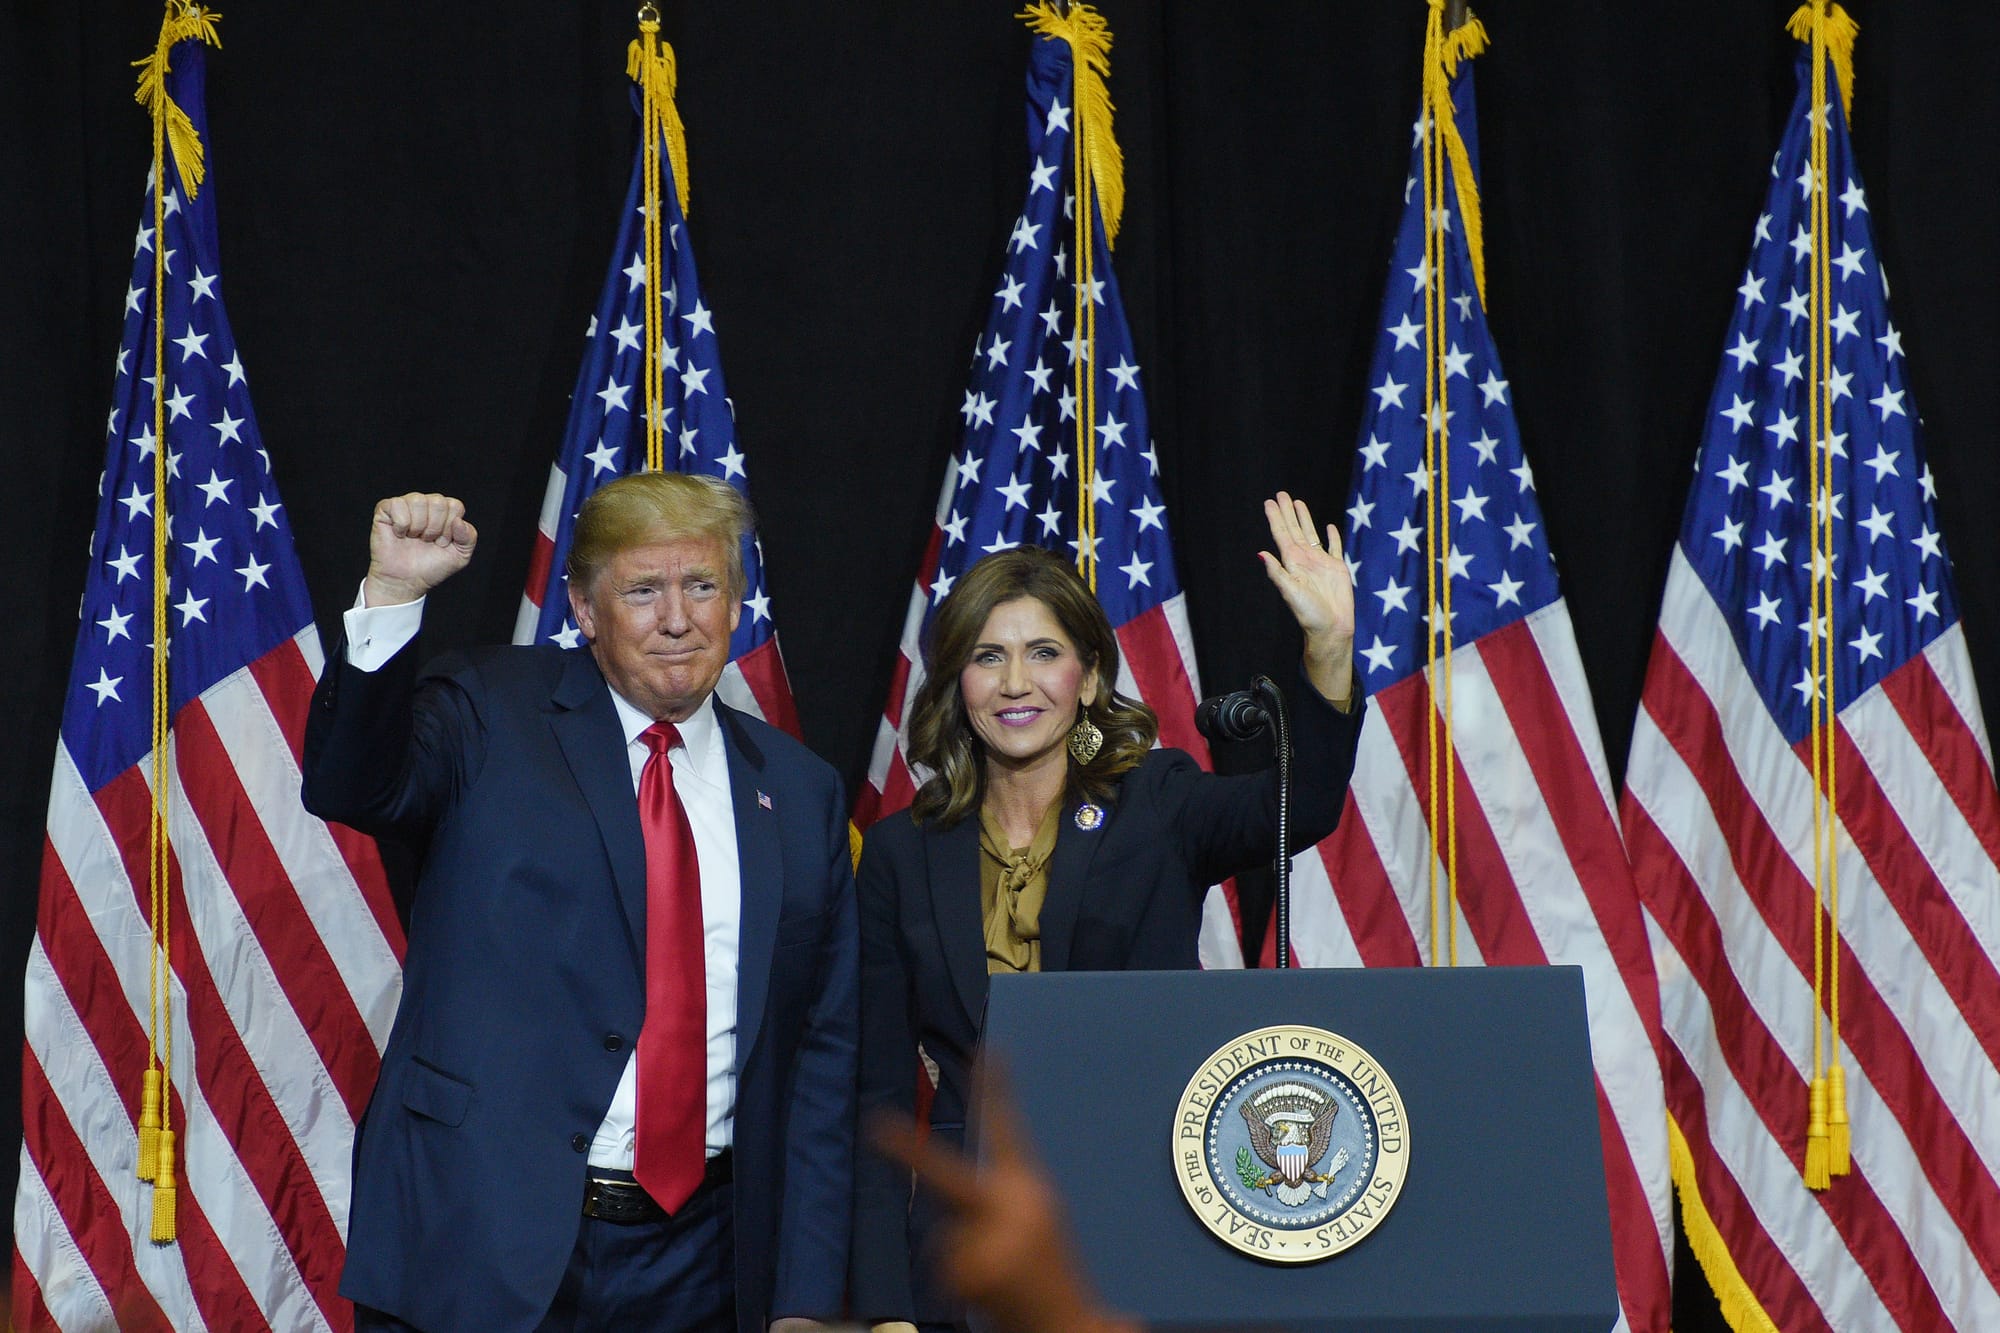 Donald Trump stands with South Dakota Kristi Noem in front of a row of flags 